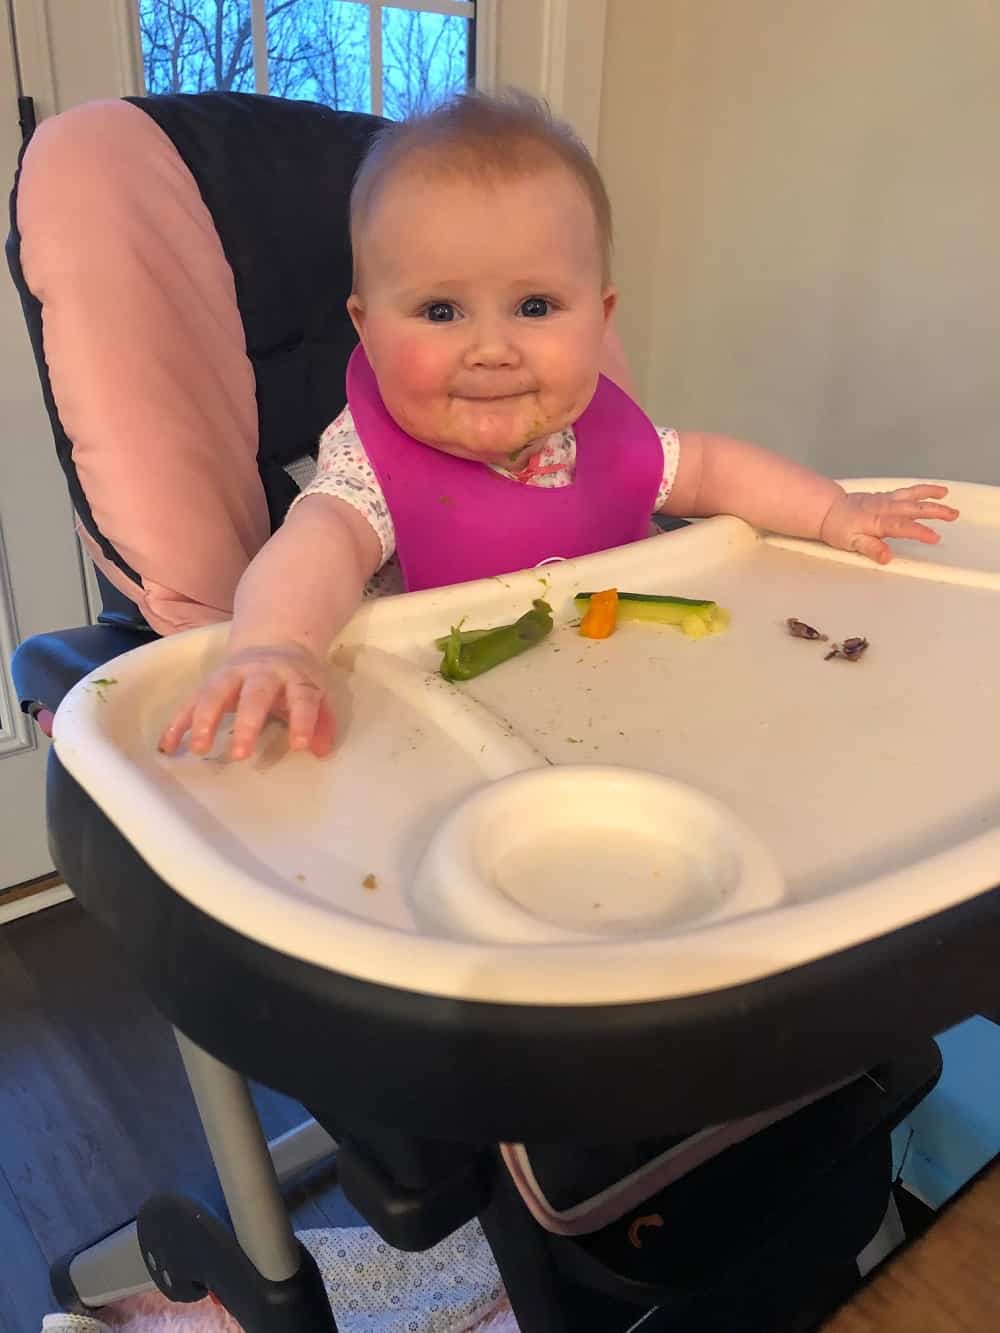 6 month old baby in high chair eating solids